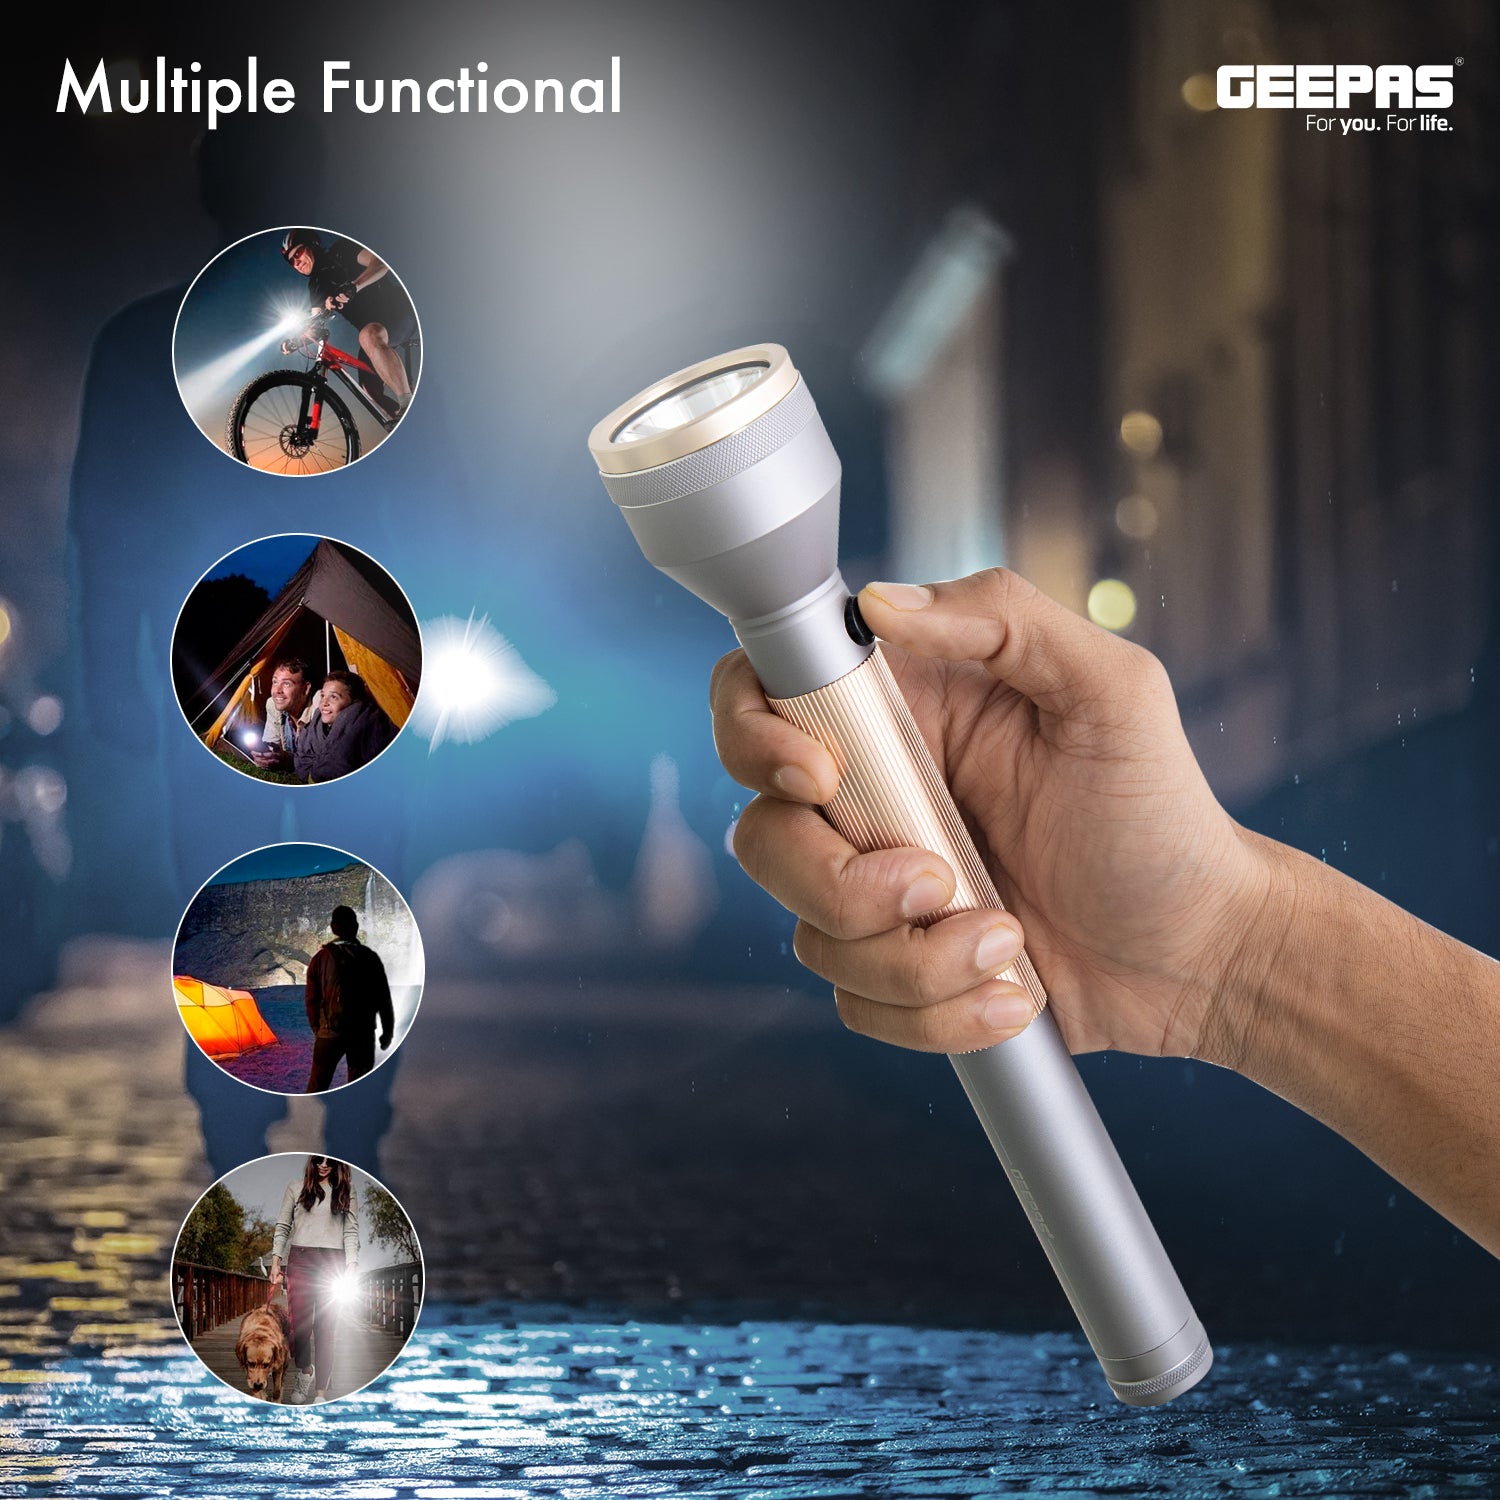 Geepas | For you. For life. 340 Lumens Rose Gold LED Torch With Power Bank Lighting